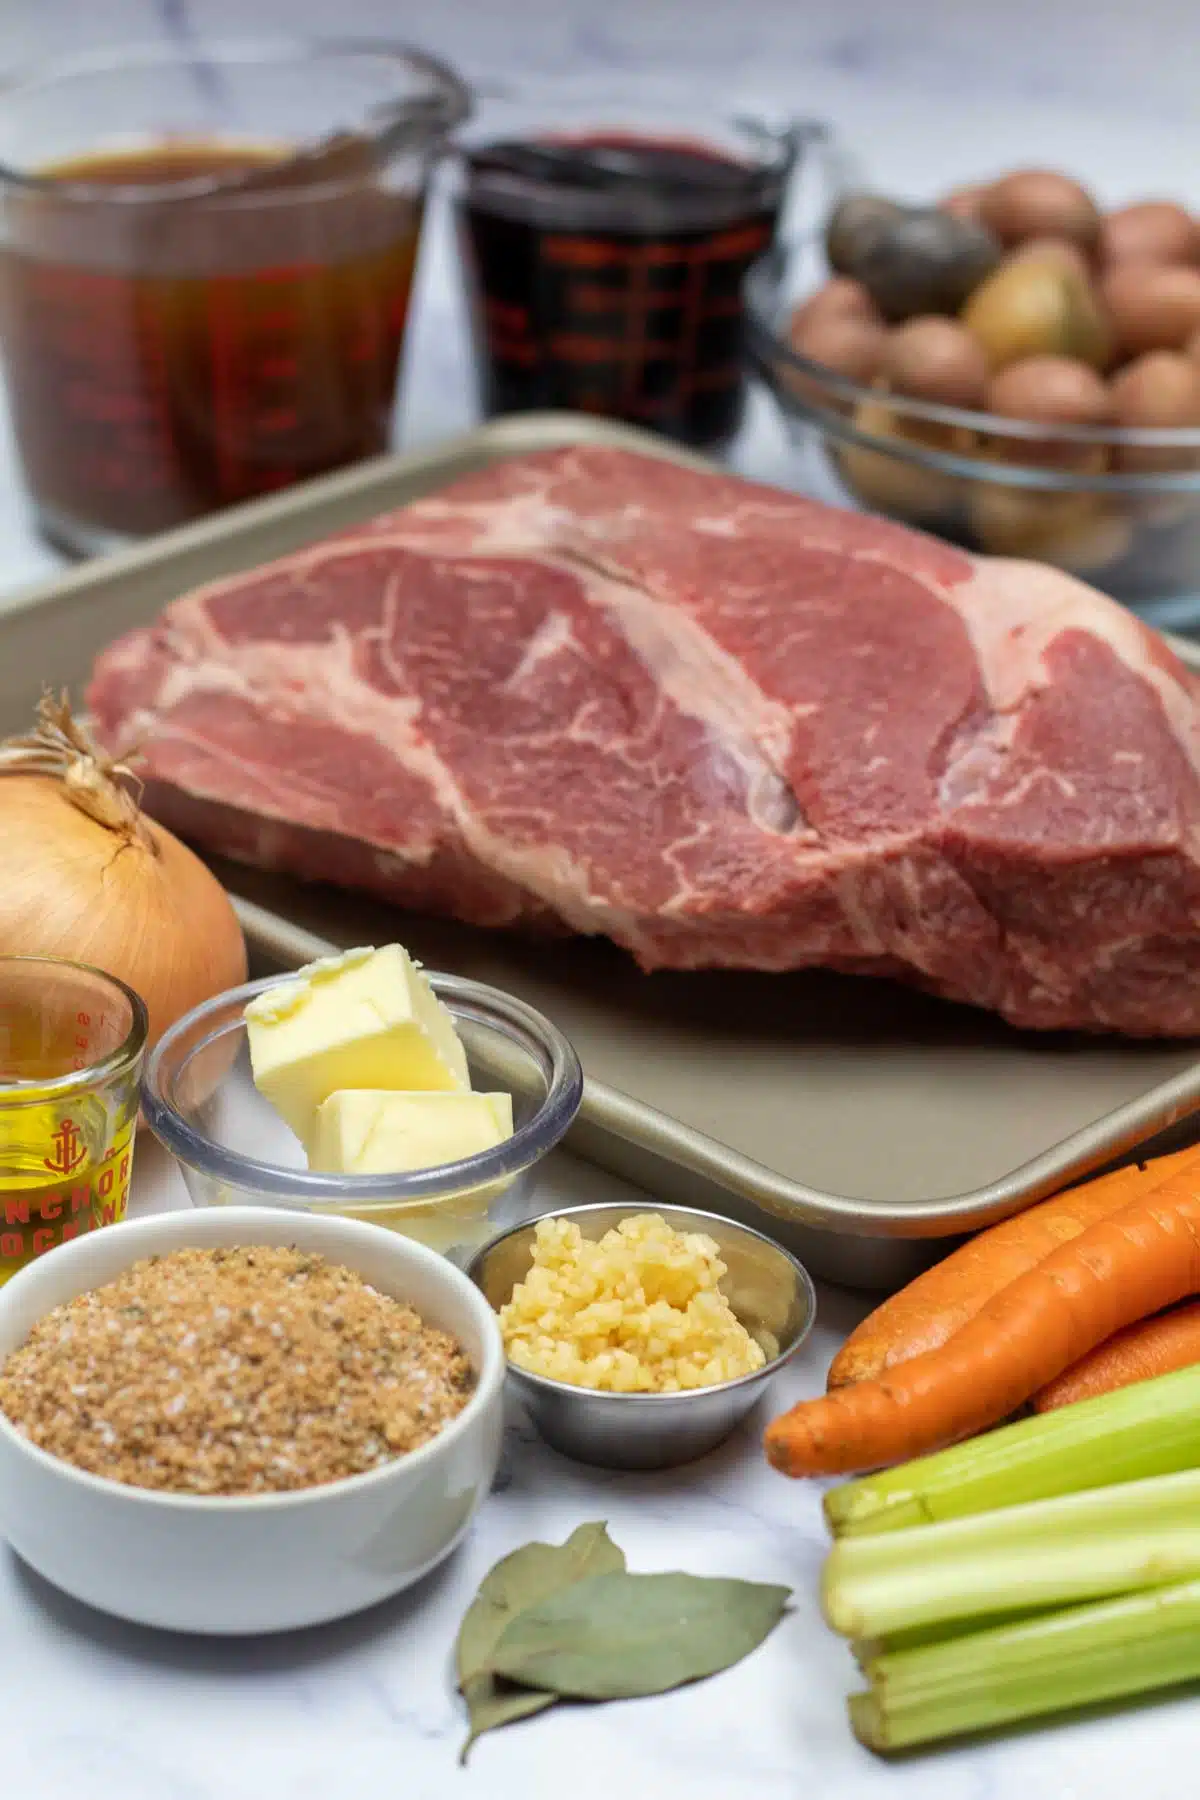 Tall image showing beef chuck roast ingredients.